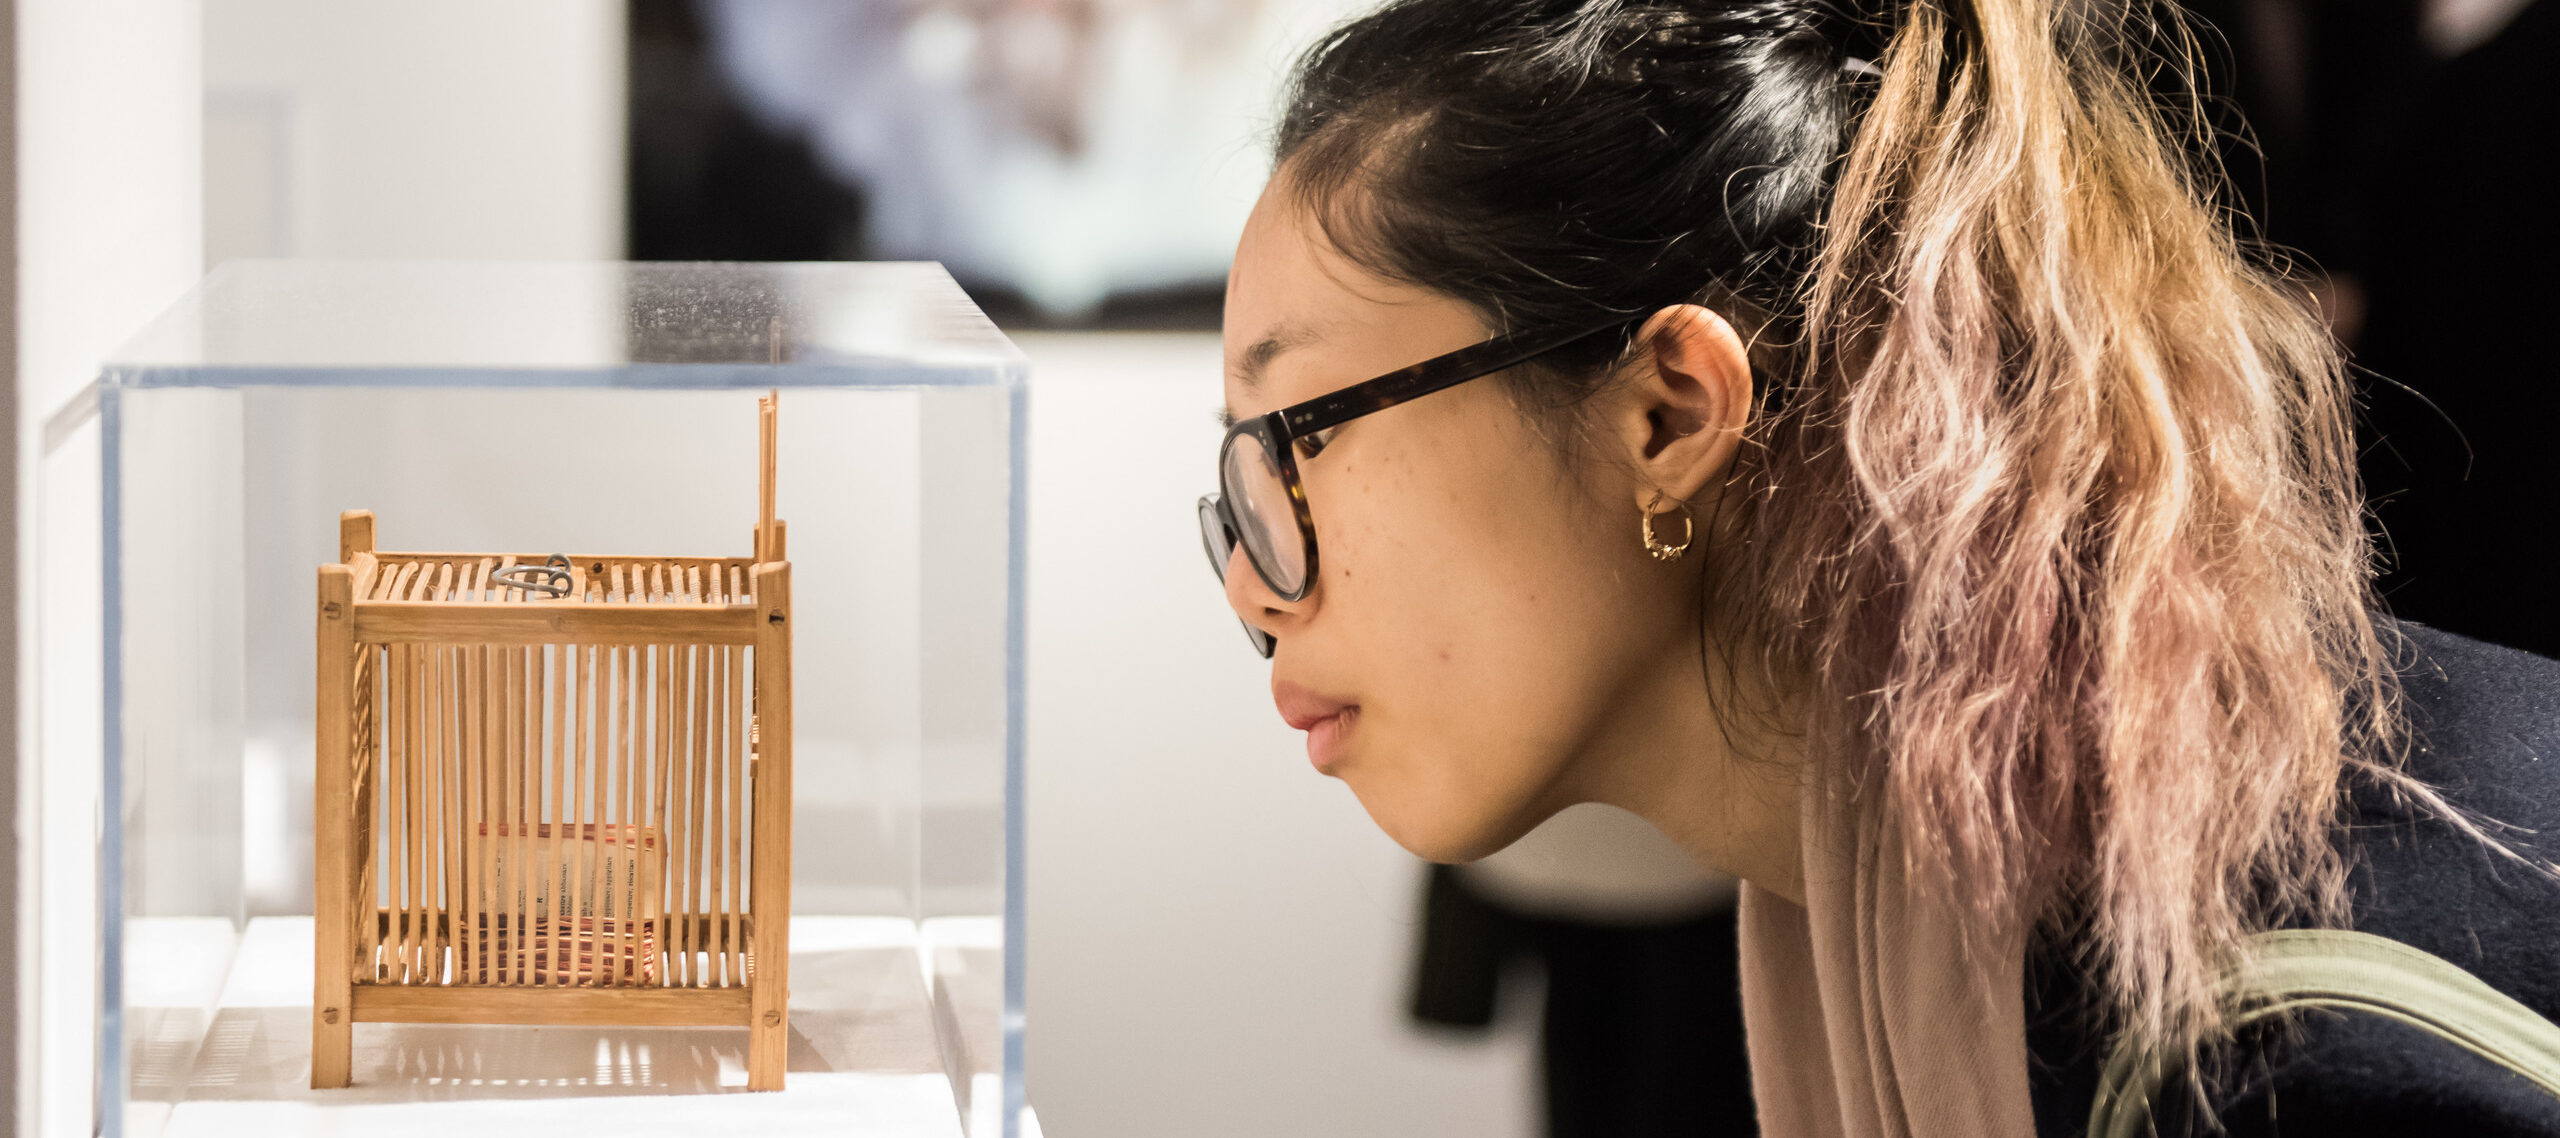 Partial gallery view of a young woman in a ponytail and glasses bending down to look at a tiny contemporary sculpture in a glass vitrine.